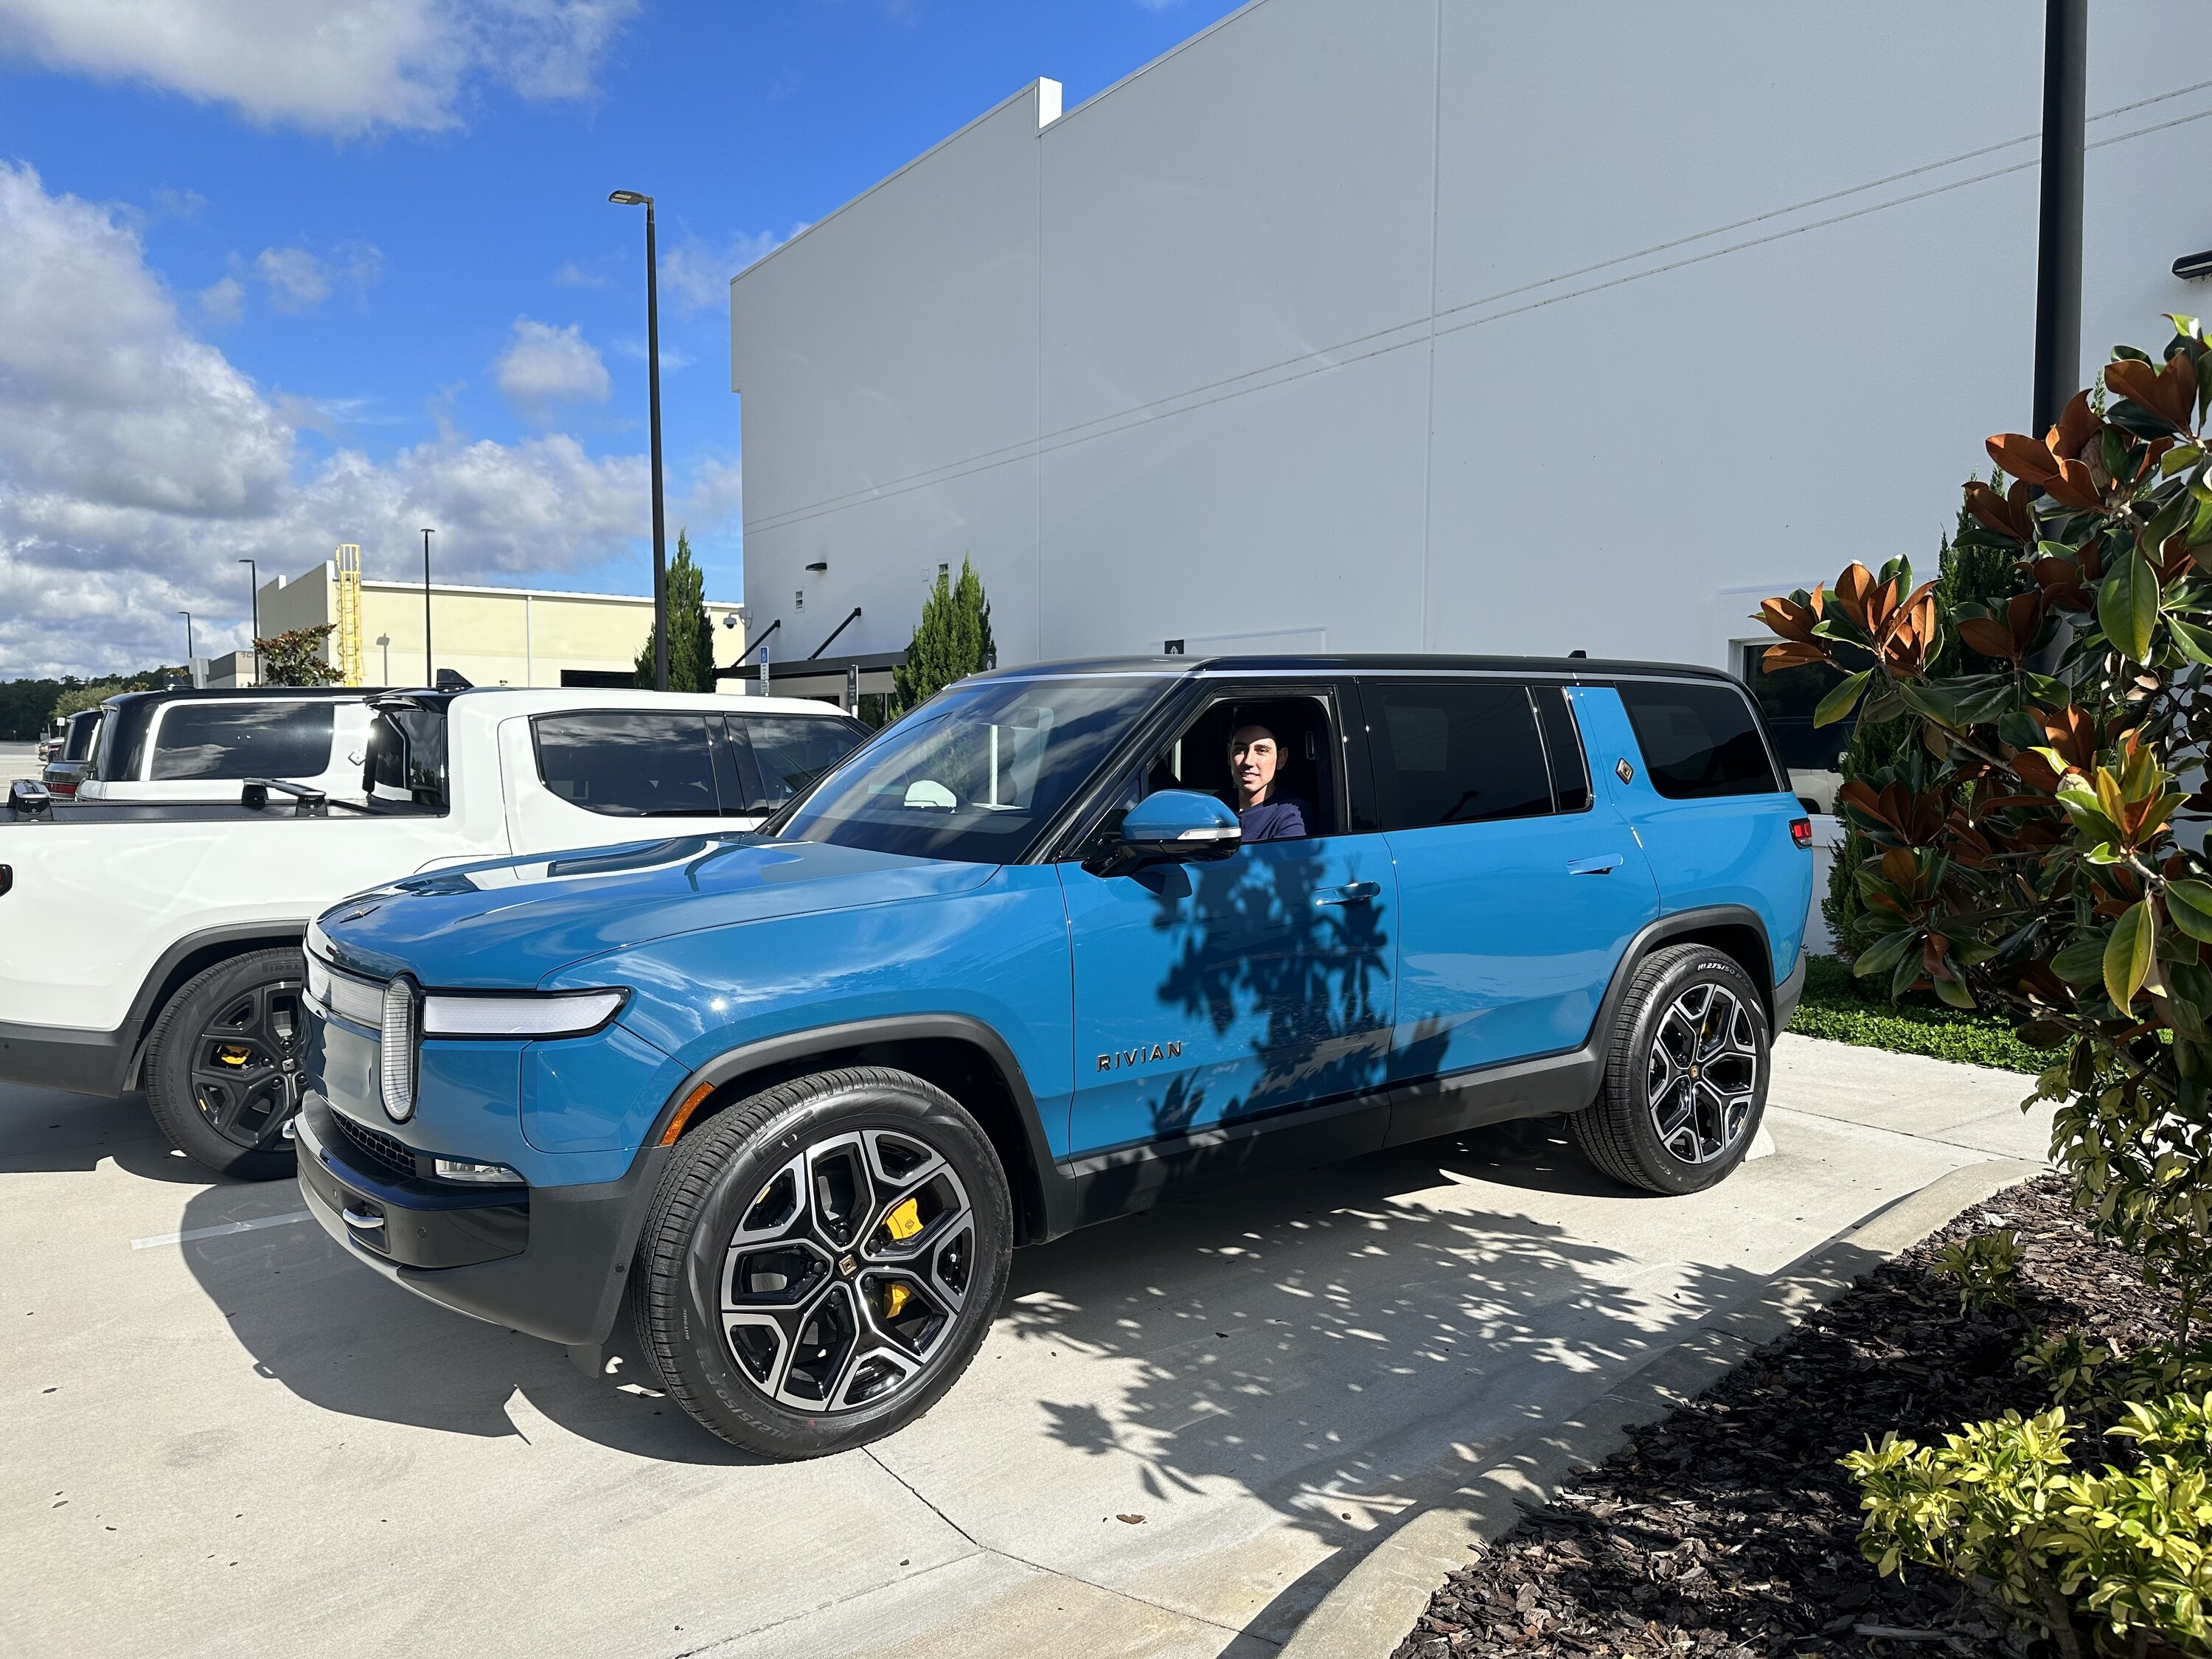 Rivian R1T R1S If you’re taking delivery… hope yours goes as well as ours did! IMG_2912